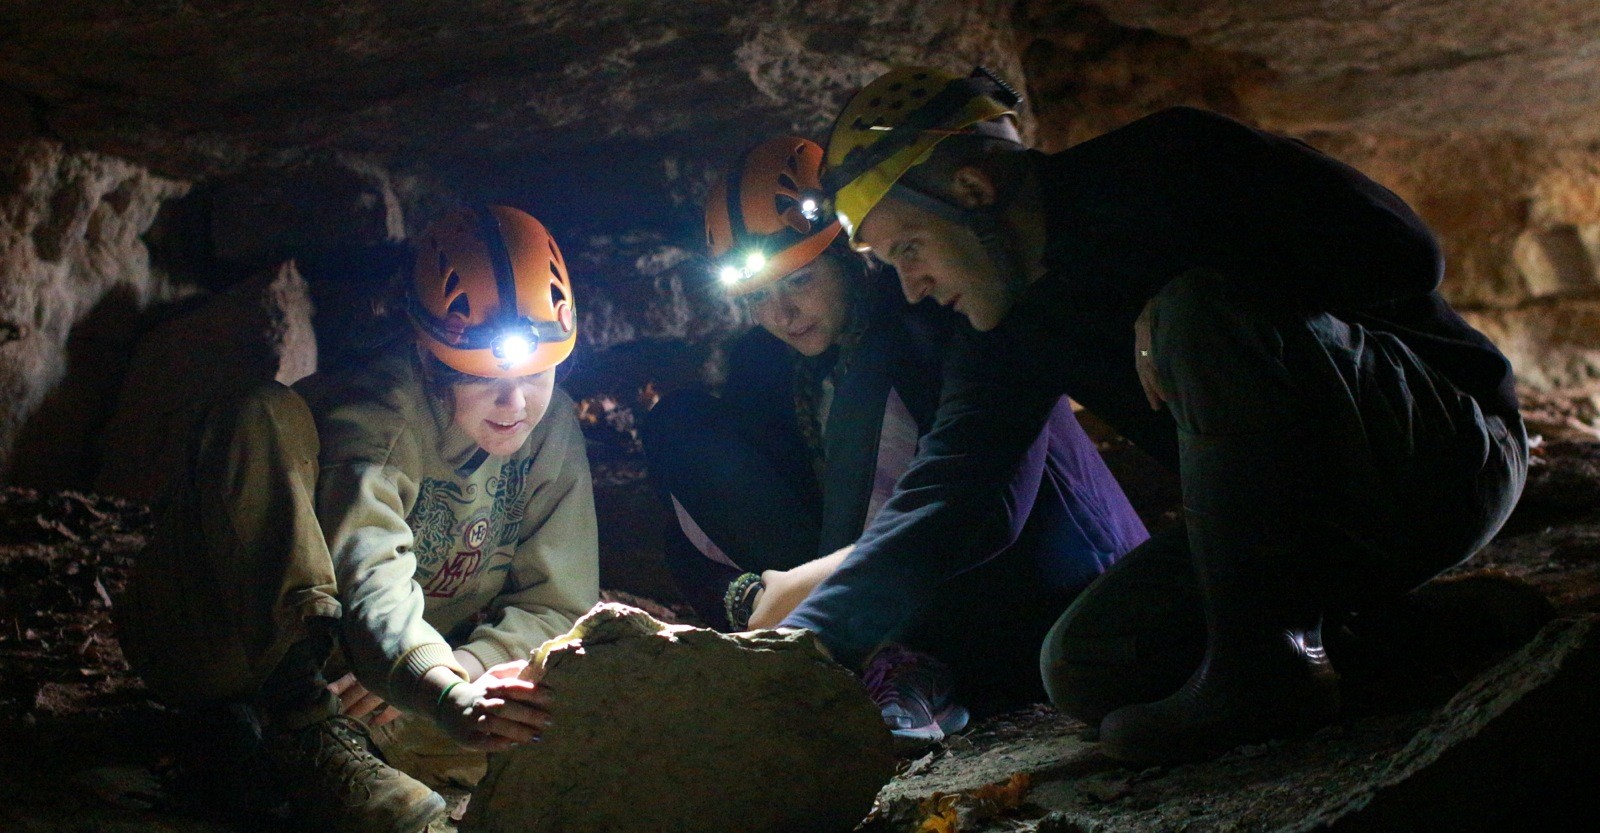 MaryBeth Yancey, C’17, (left) and Bre Ayala, C’17, (center) are two of more than a dozen students who have worked on biological surveys in area caves with Biology Professor Kirk Zigler. Photo by Stephen Priest, C’20